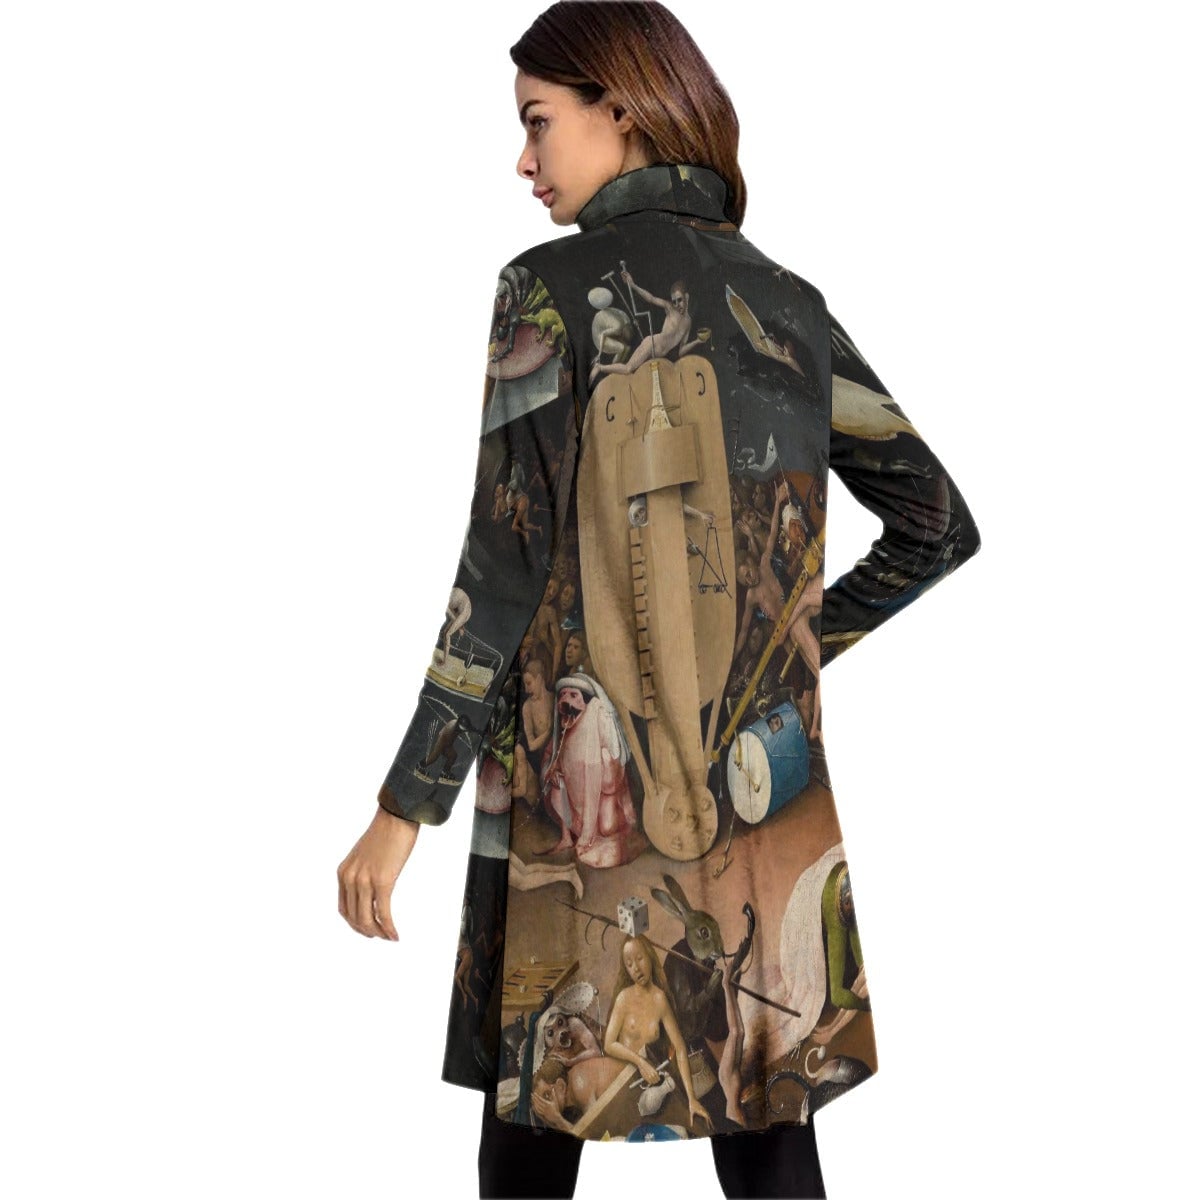 The Garden of Earthly Delights Hieronymus Bosch Dress Long Sleeve